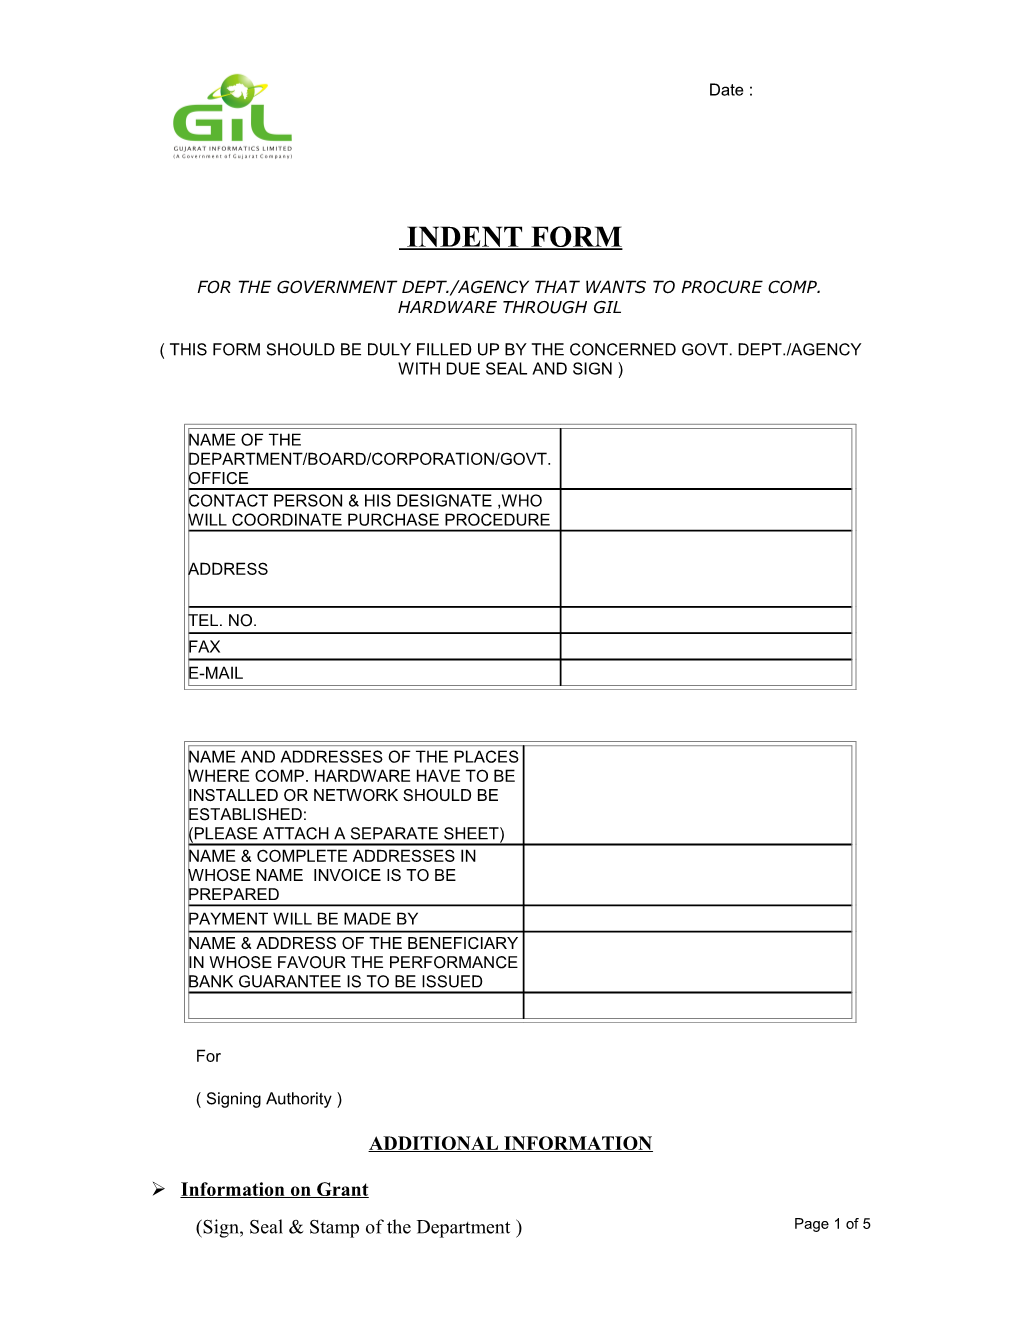 Indent Form for the Government Dept